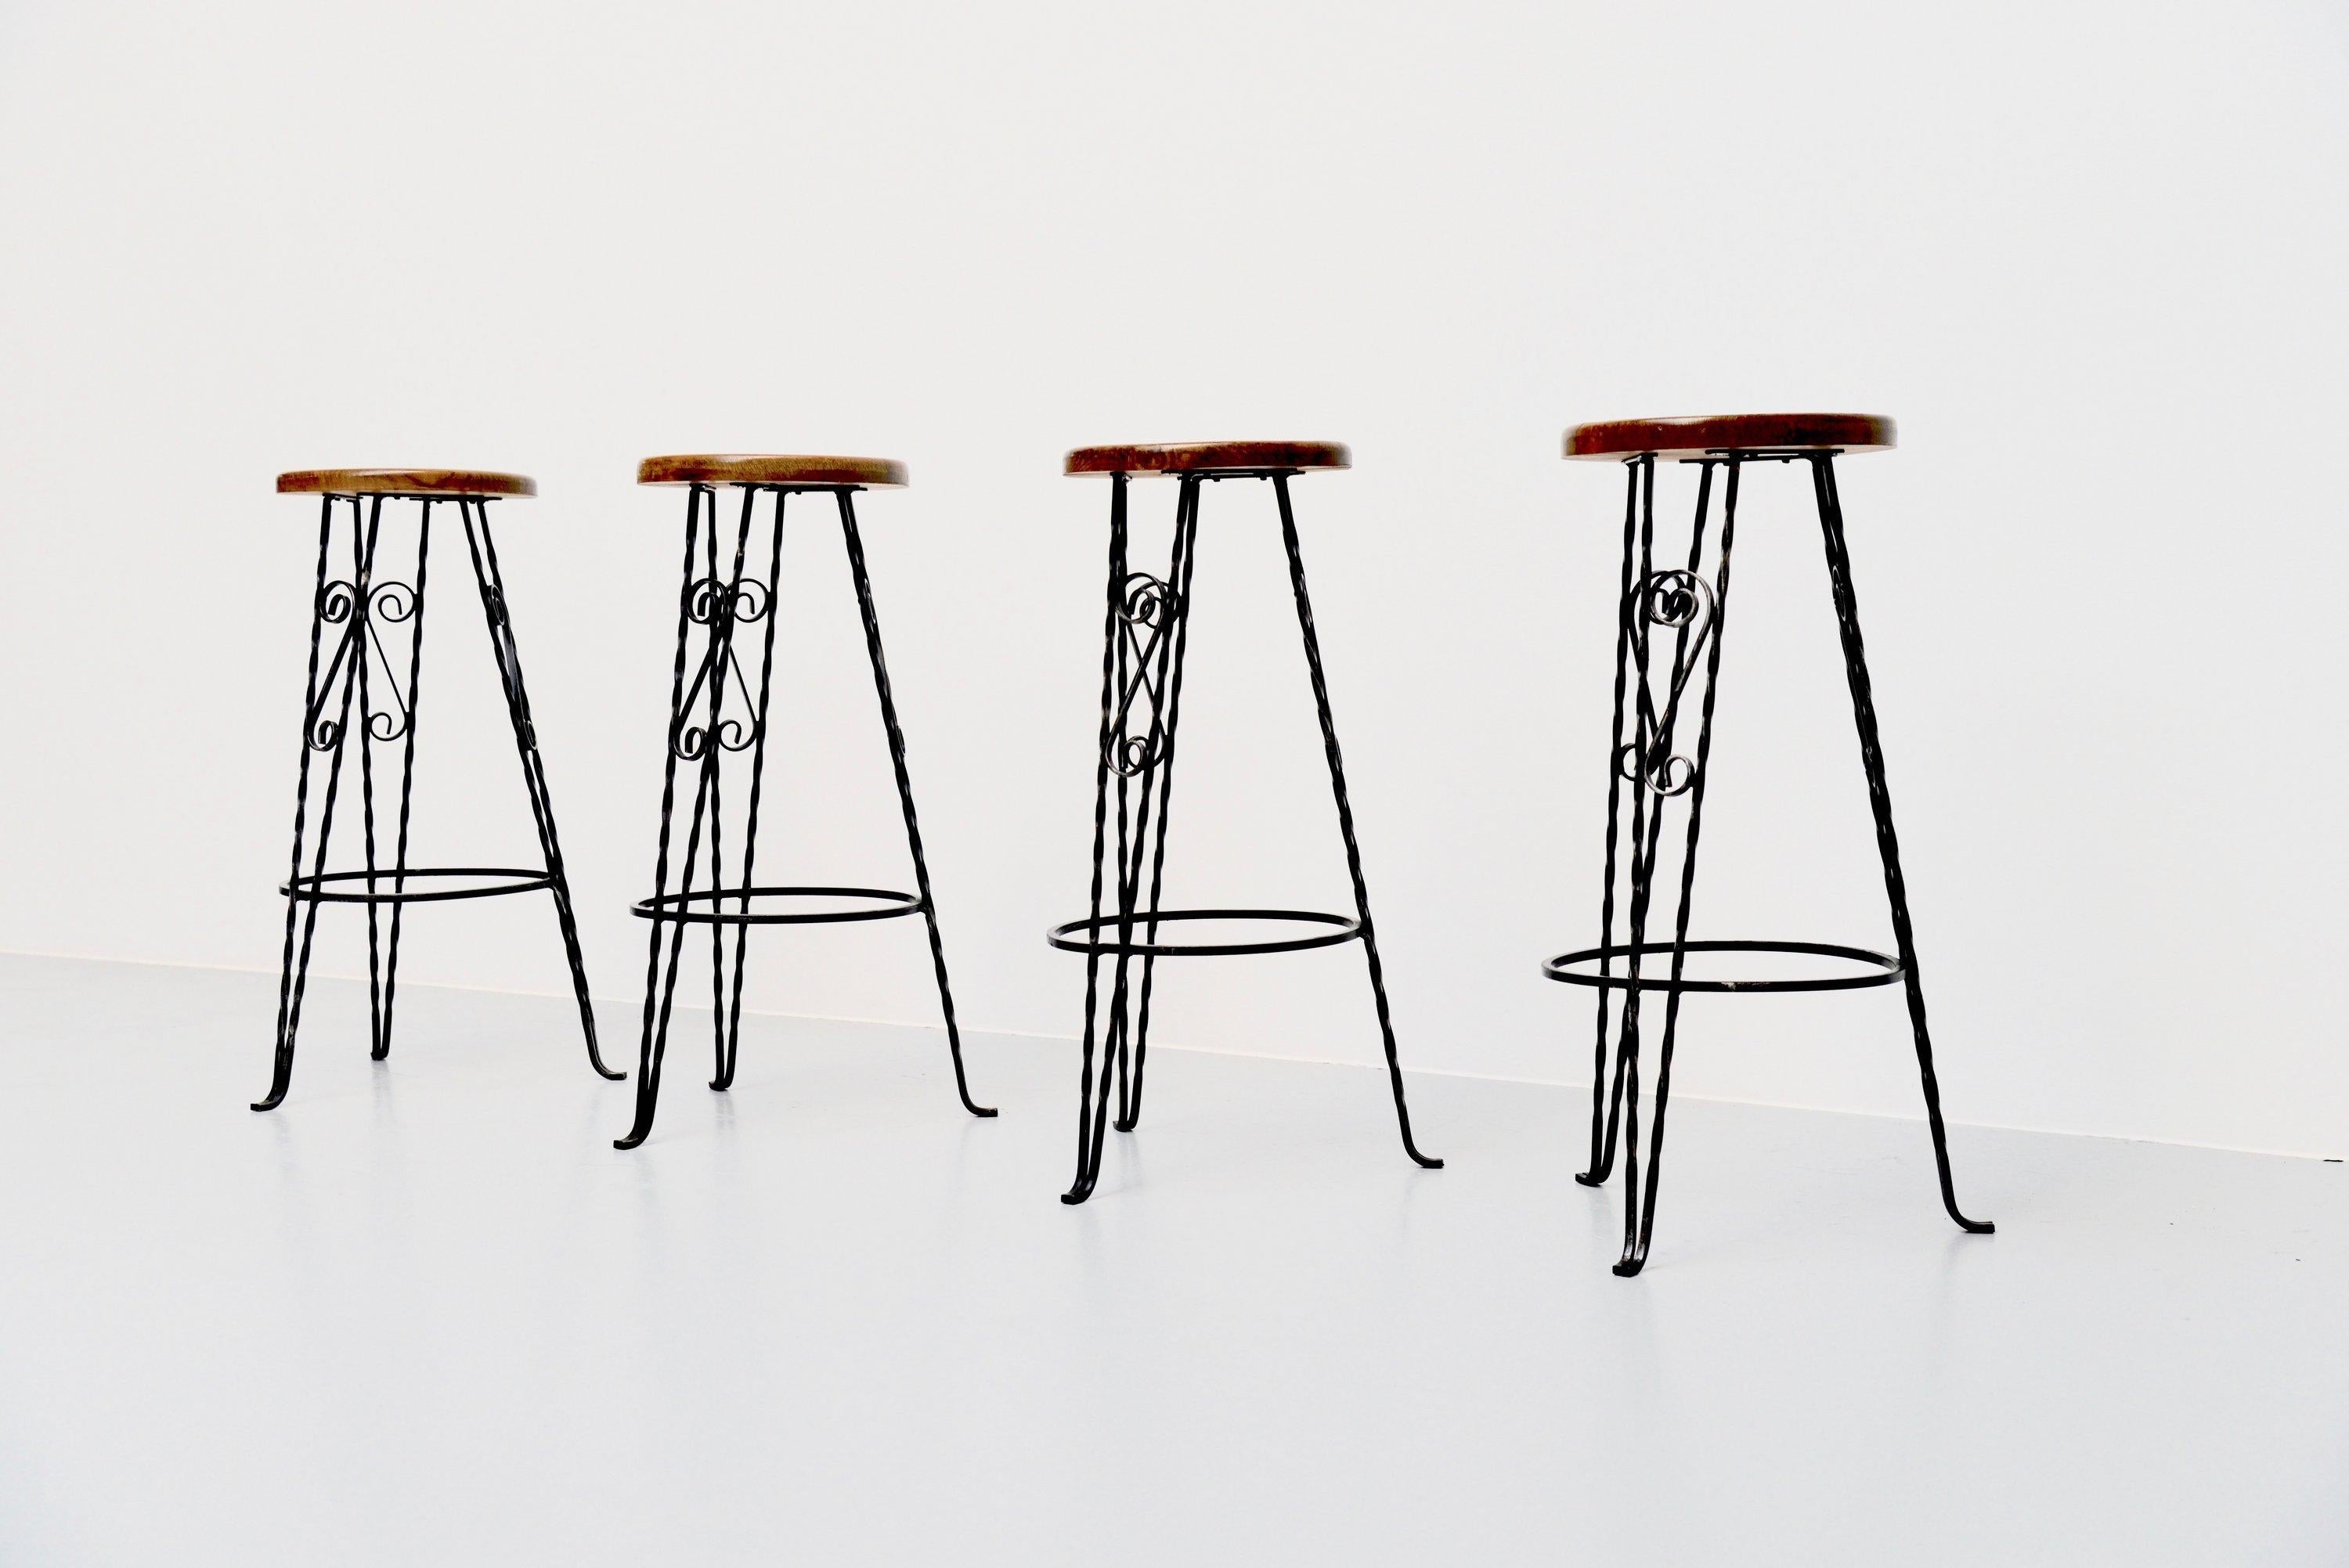 Set of 4 wrought iron bar stools made by unknown designer or manufacturer in France, 1960s. Stools are in the style of Guillerme and Chambron and Mathieu Mategot. The stools have a wrought iron sculptural shaped frame and an ash wooden seat. Very